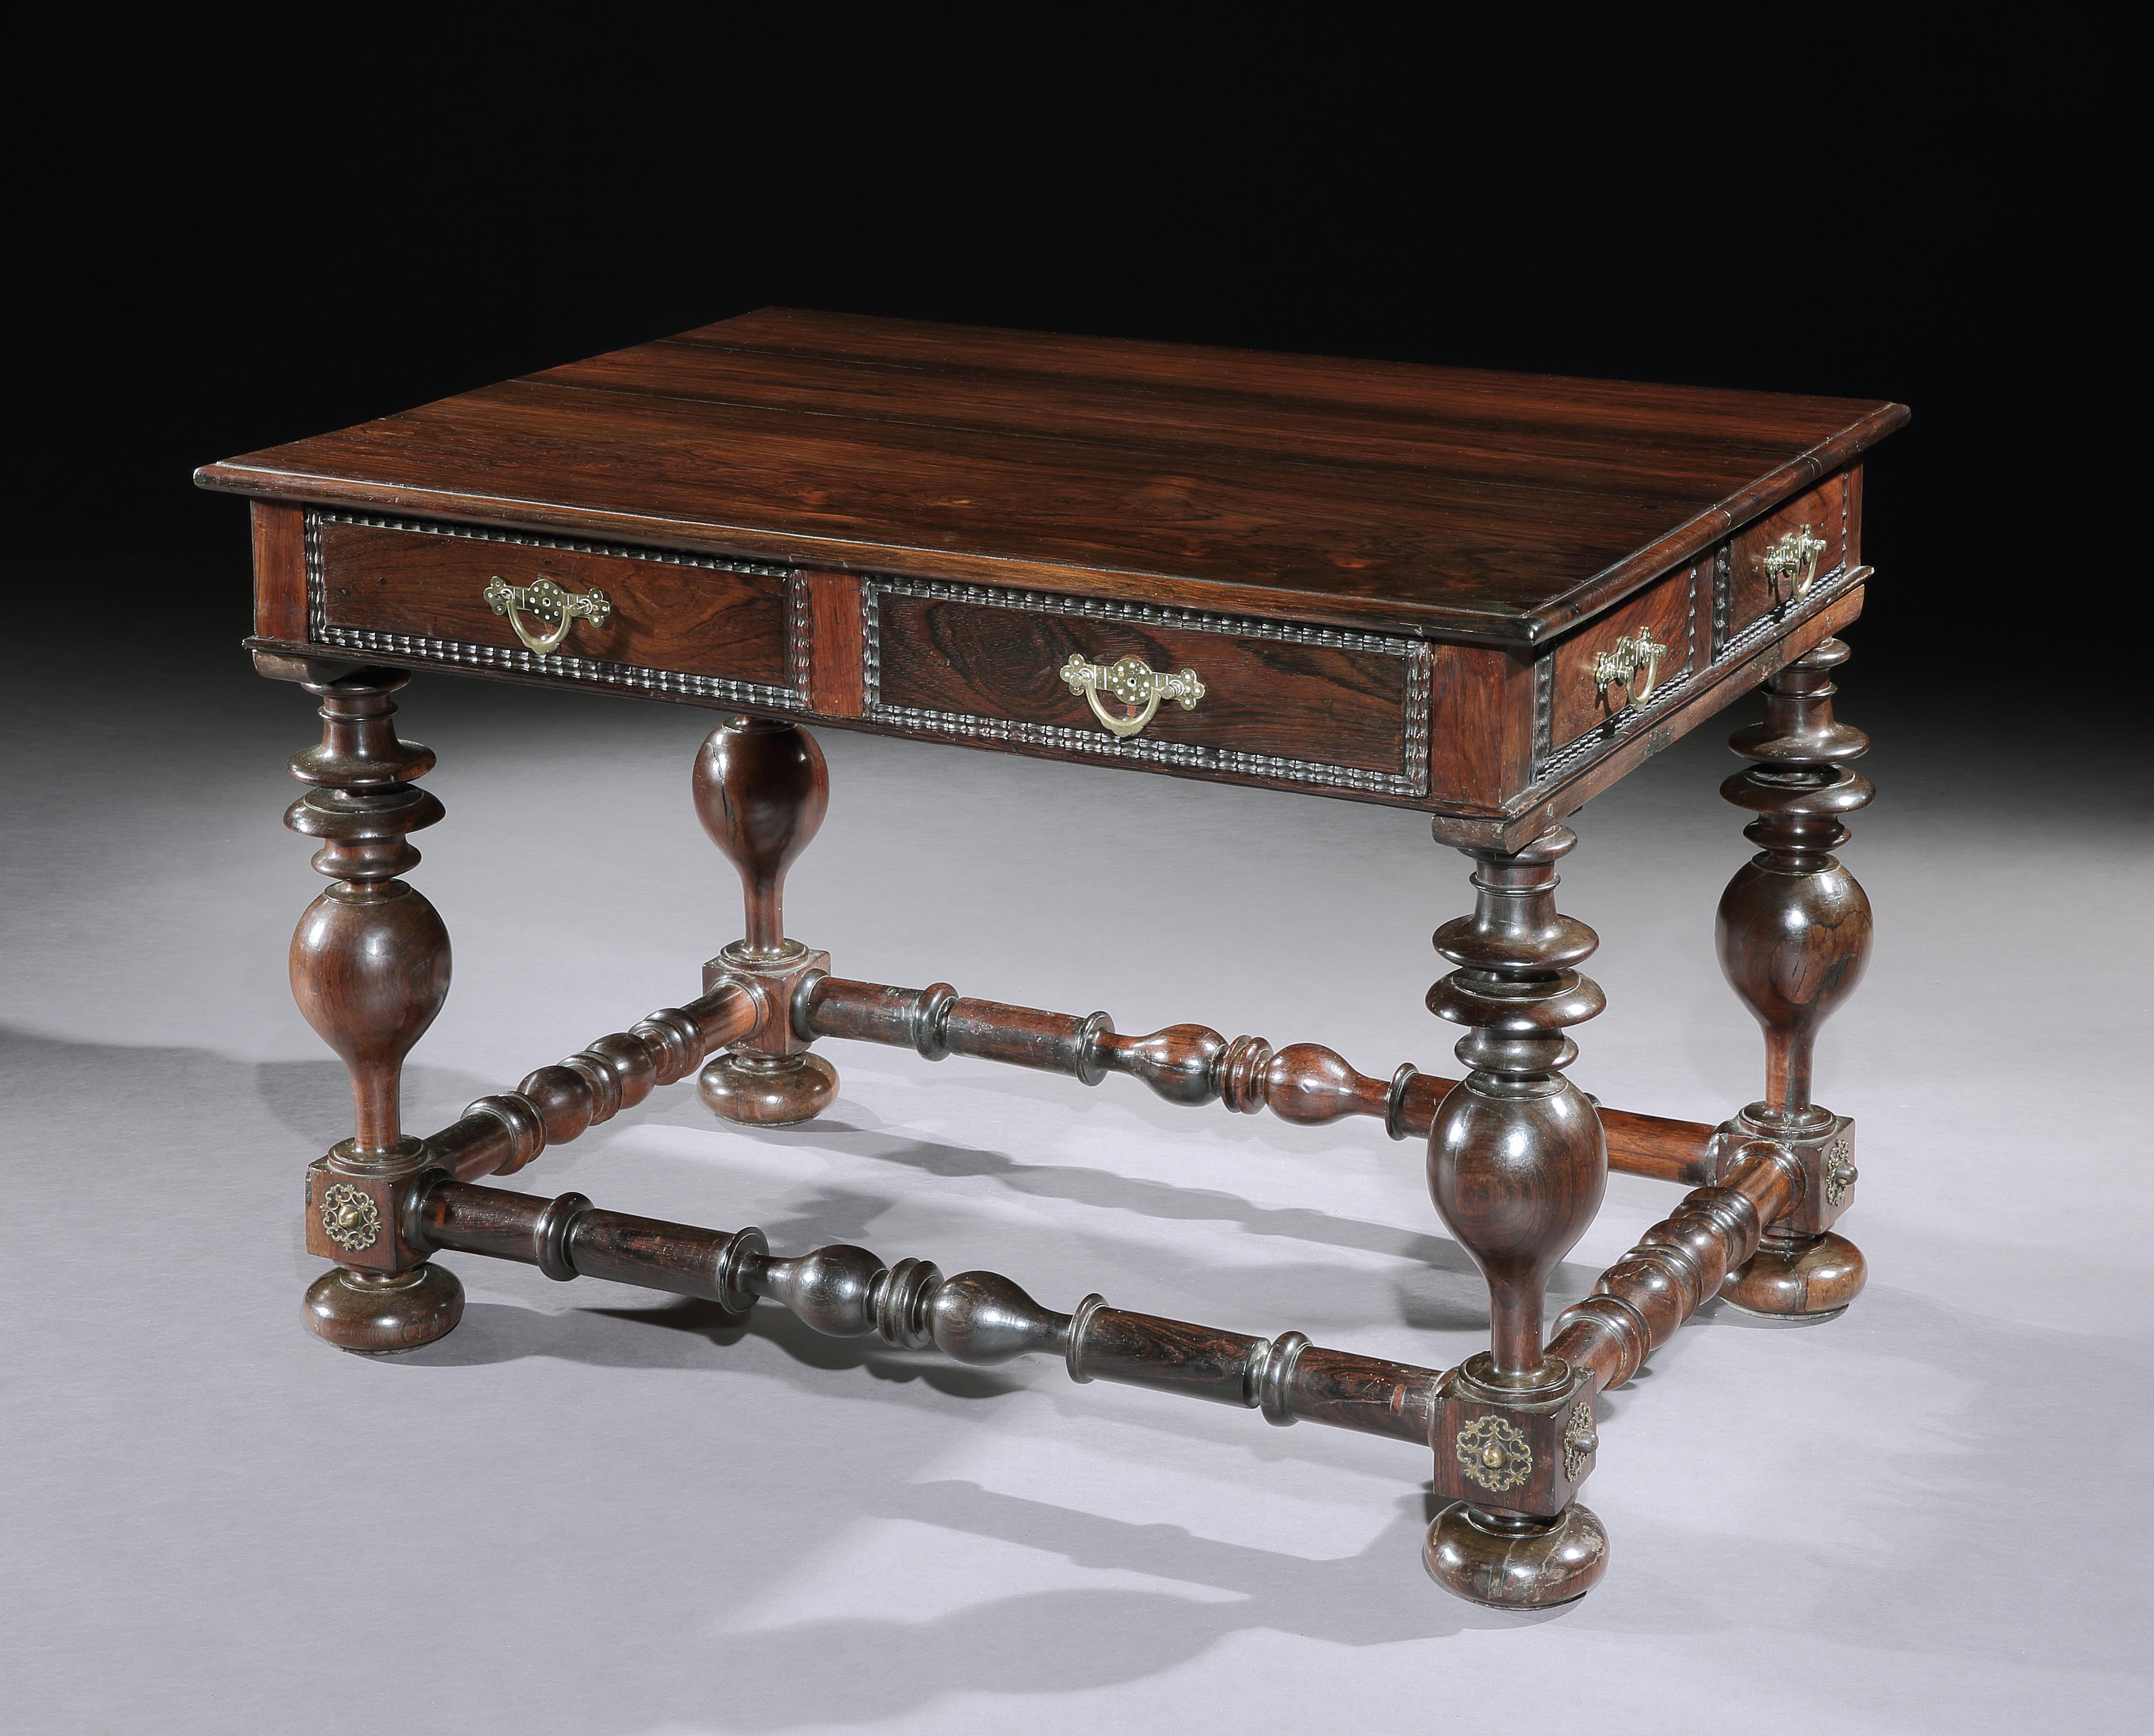 This handsome table is unusual as it has more Dutch influenced features than traditional Portuguese tables of the period. The use of ripple moldings around the friezes and drawers is a typical Dutch inspired feature used in Portuguese cabinet